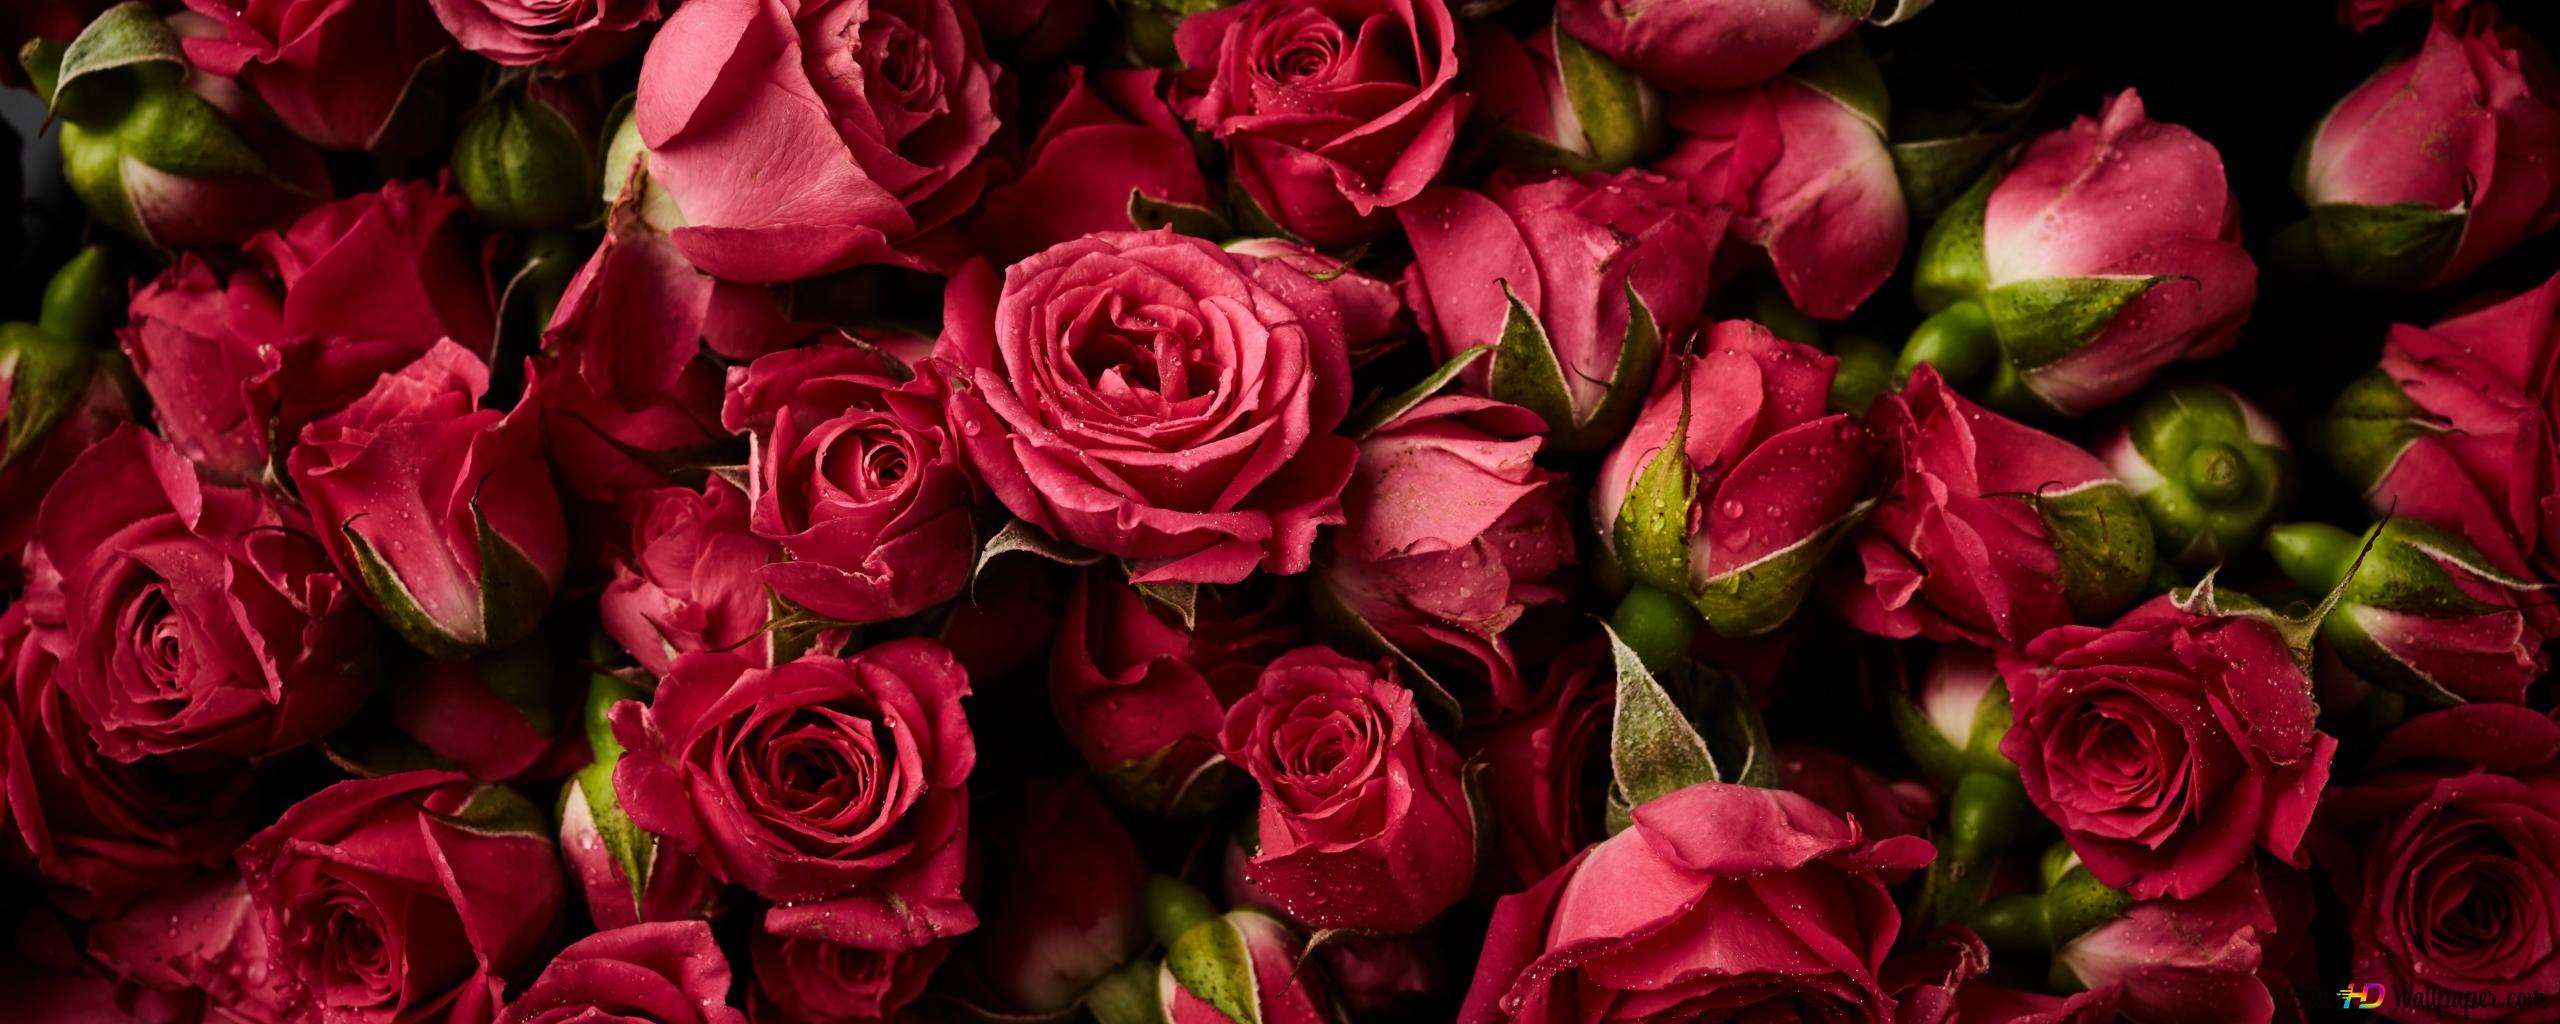 Valentine's day roses decorations 2K wallpaper download